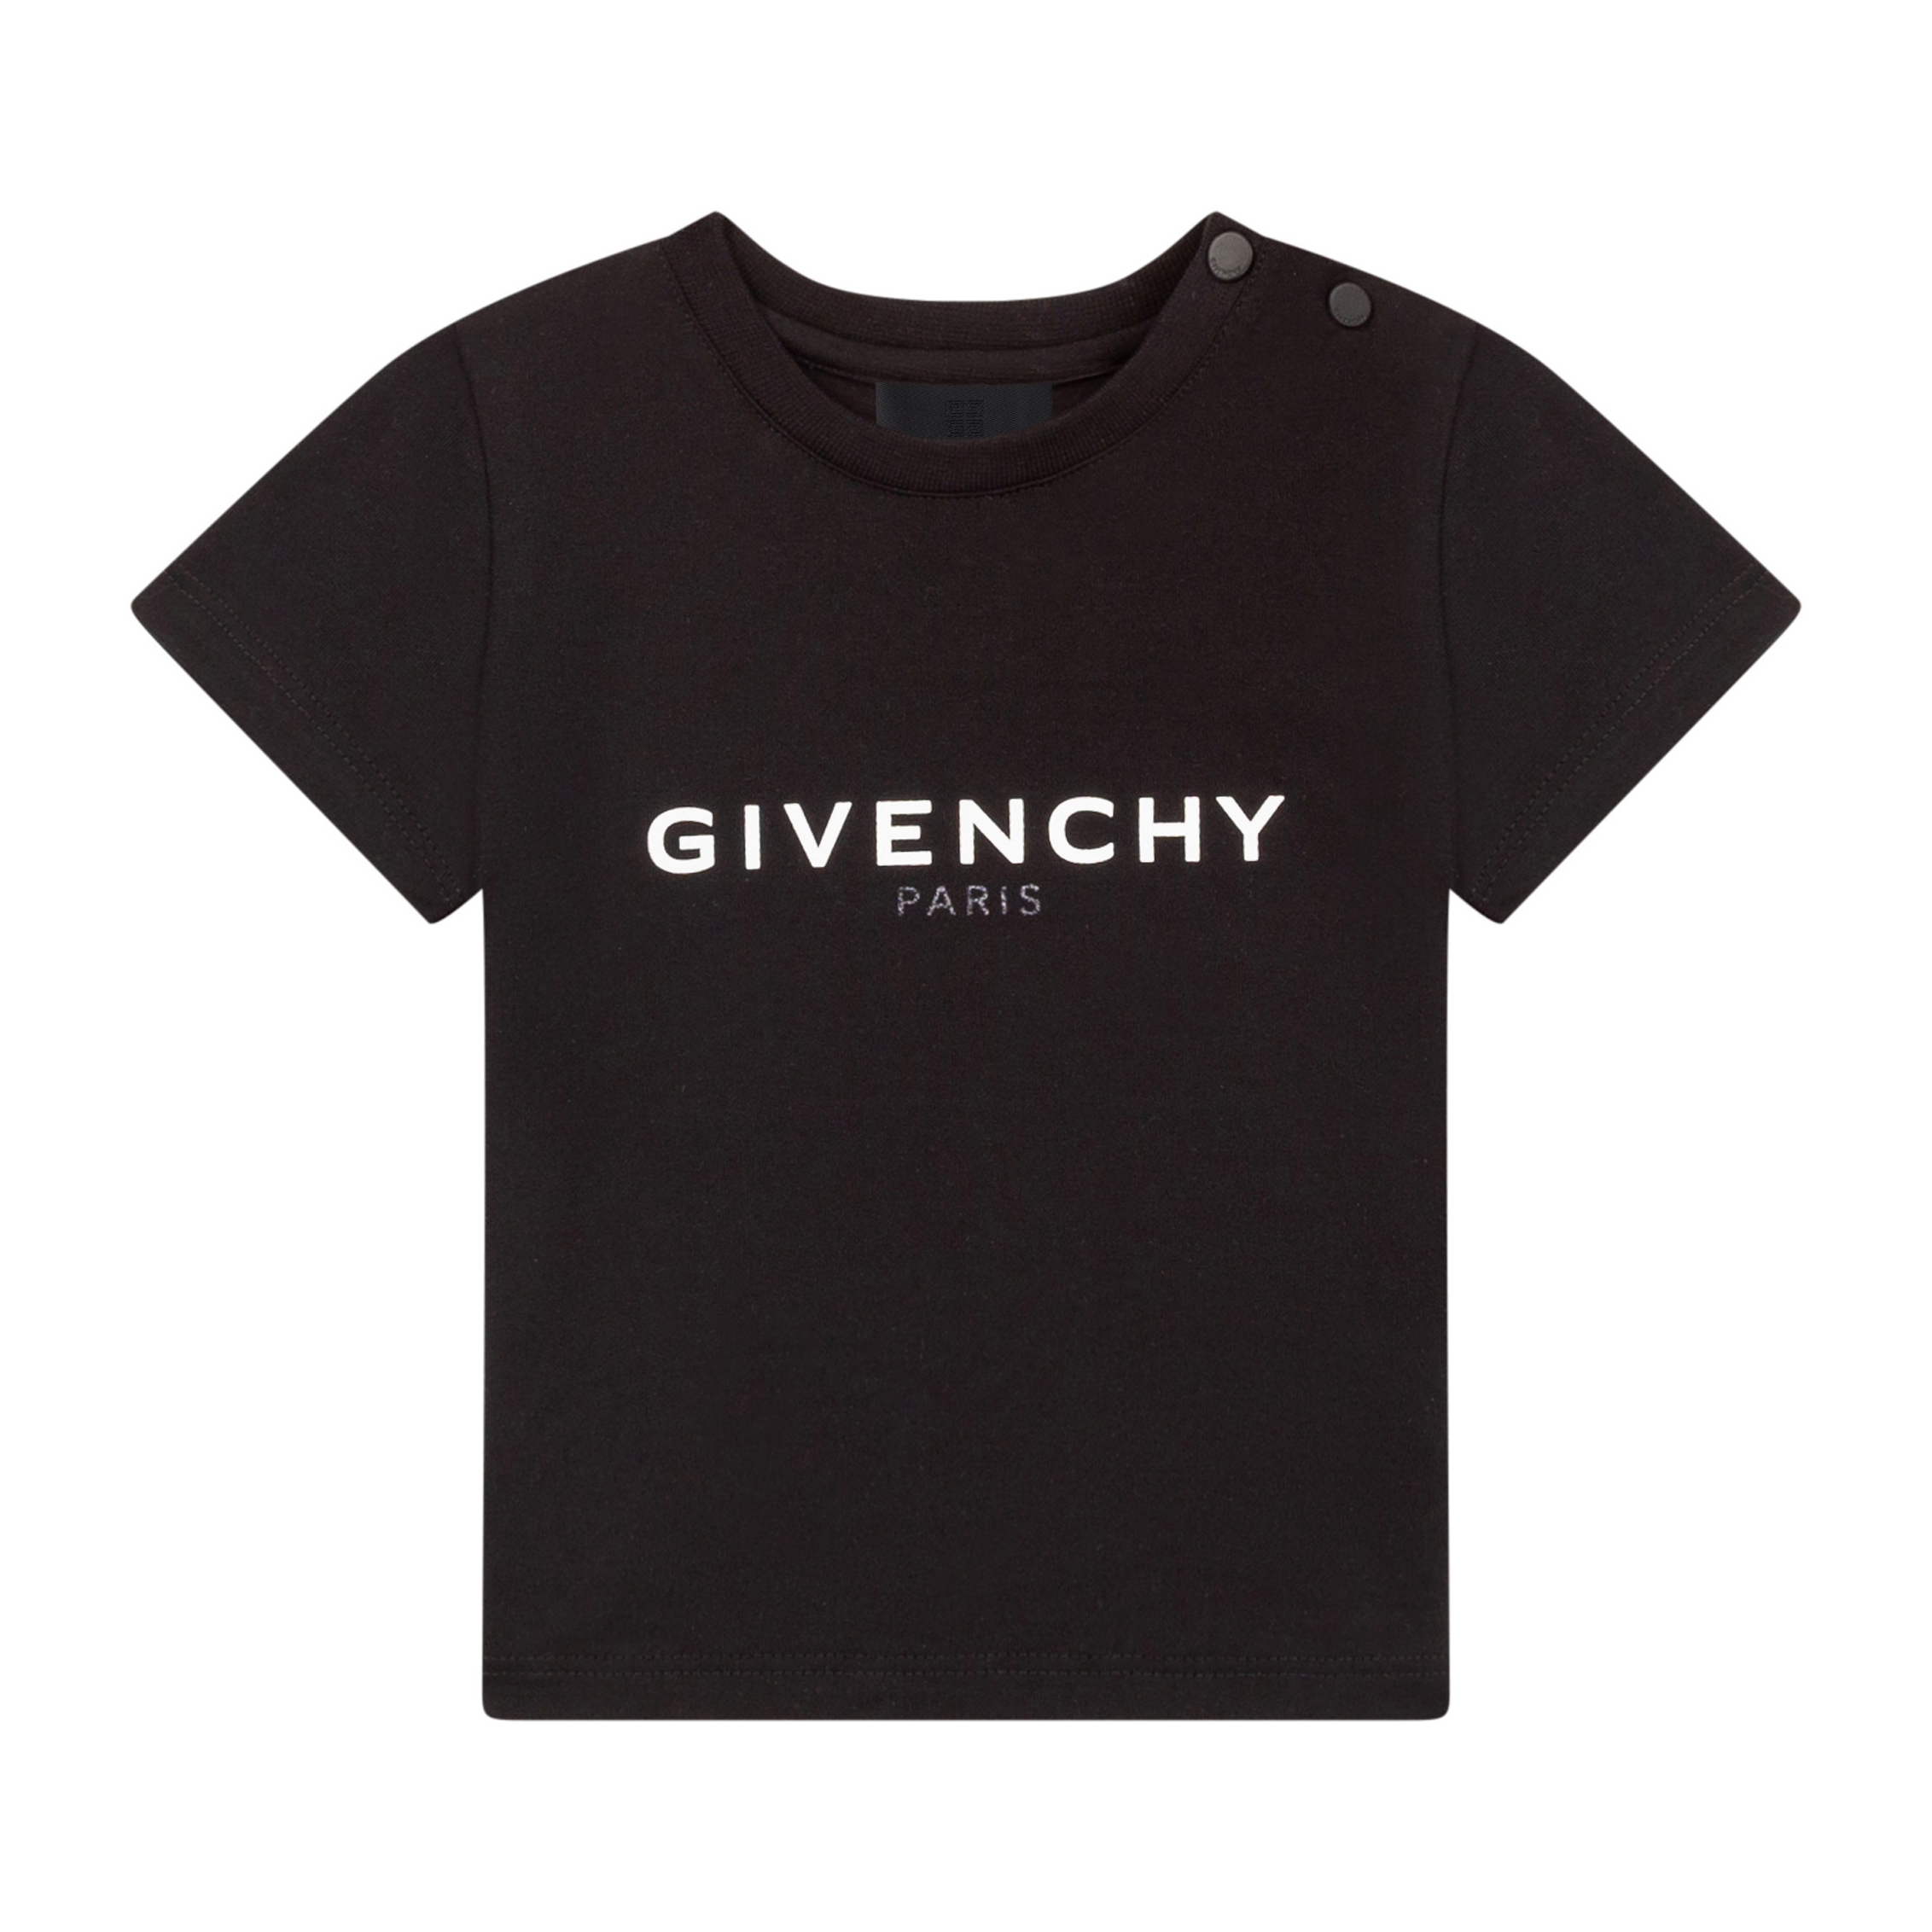 GIVENCHY T-SHIRT – lestyle